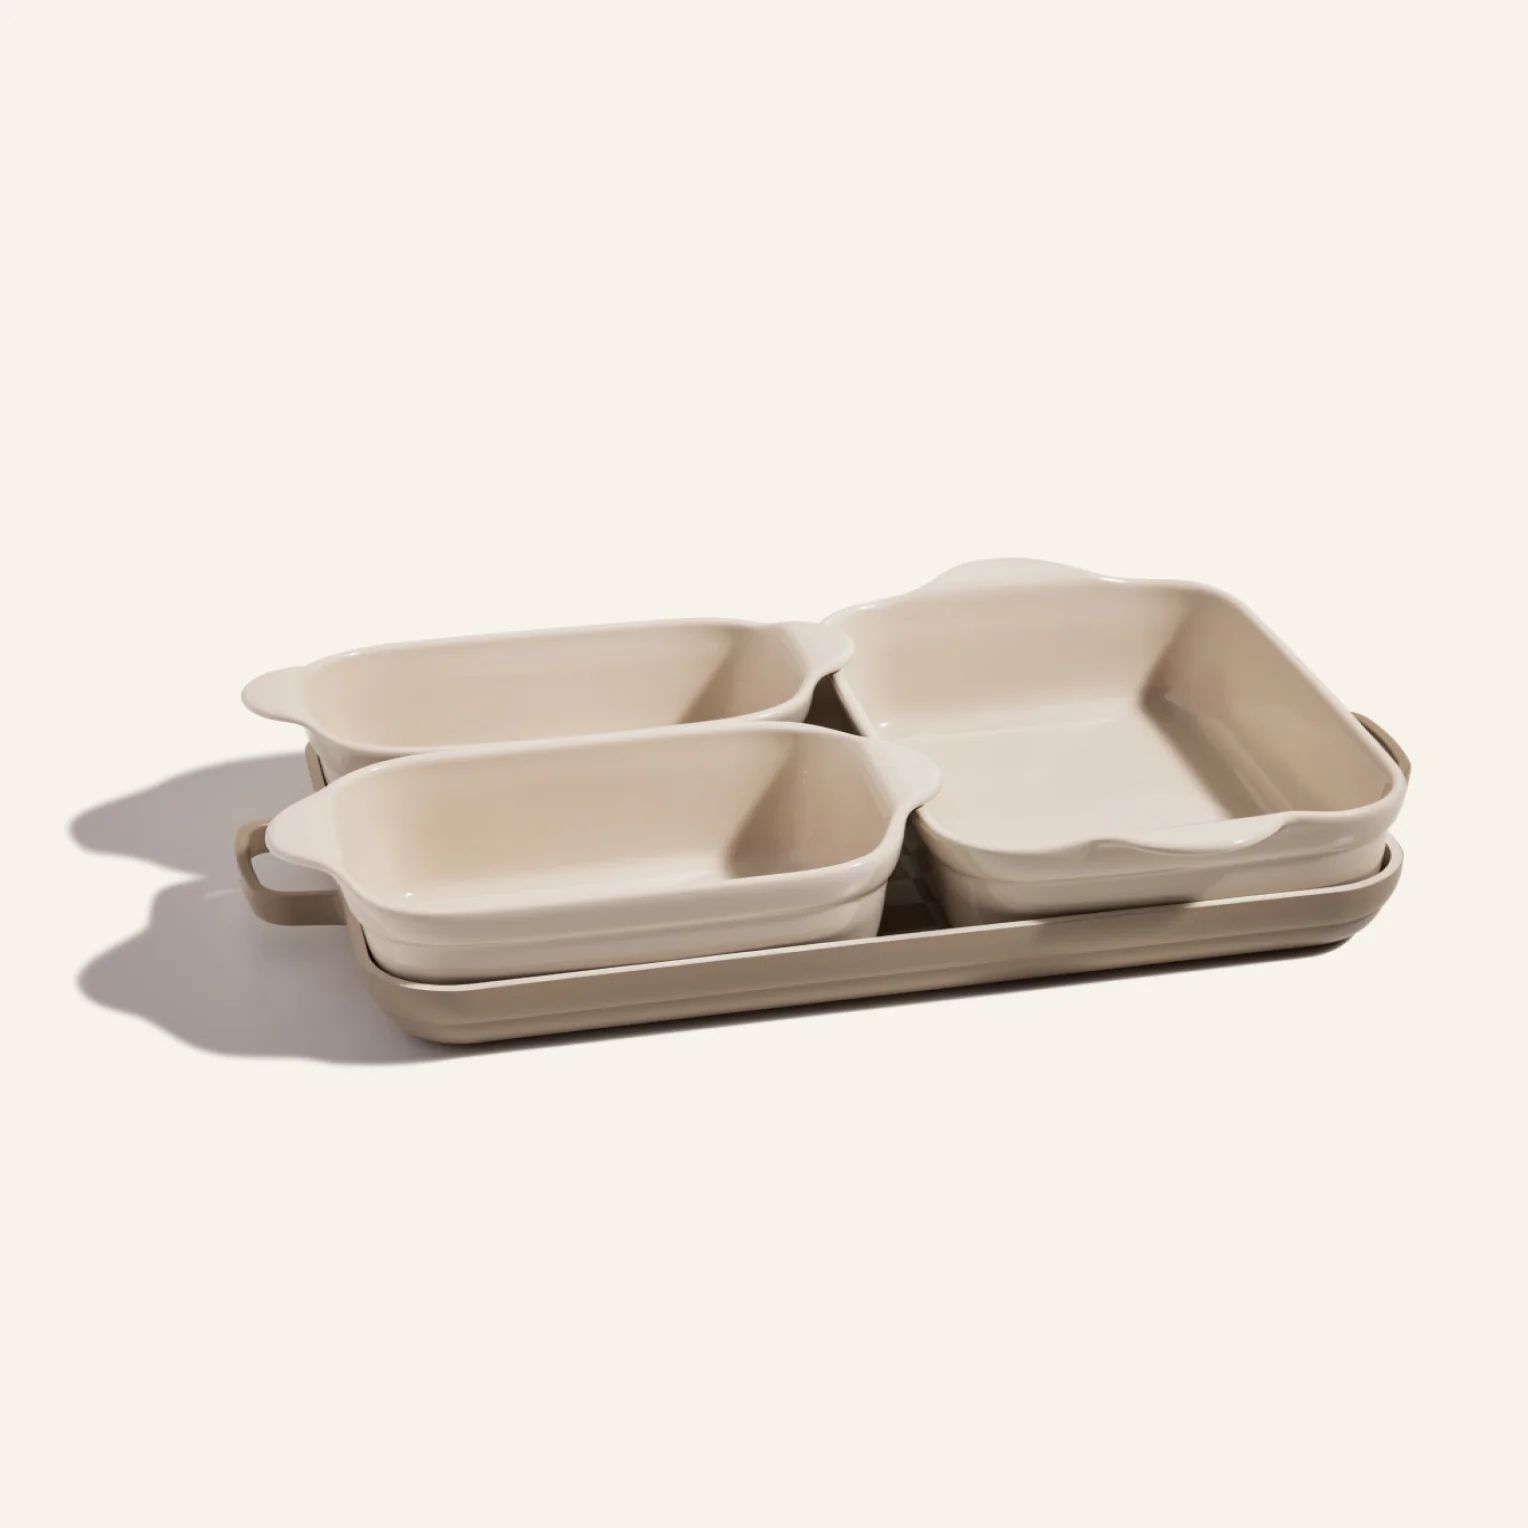 Ovenware Set | Our Place